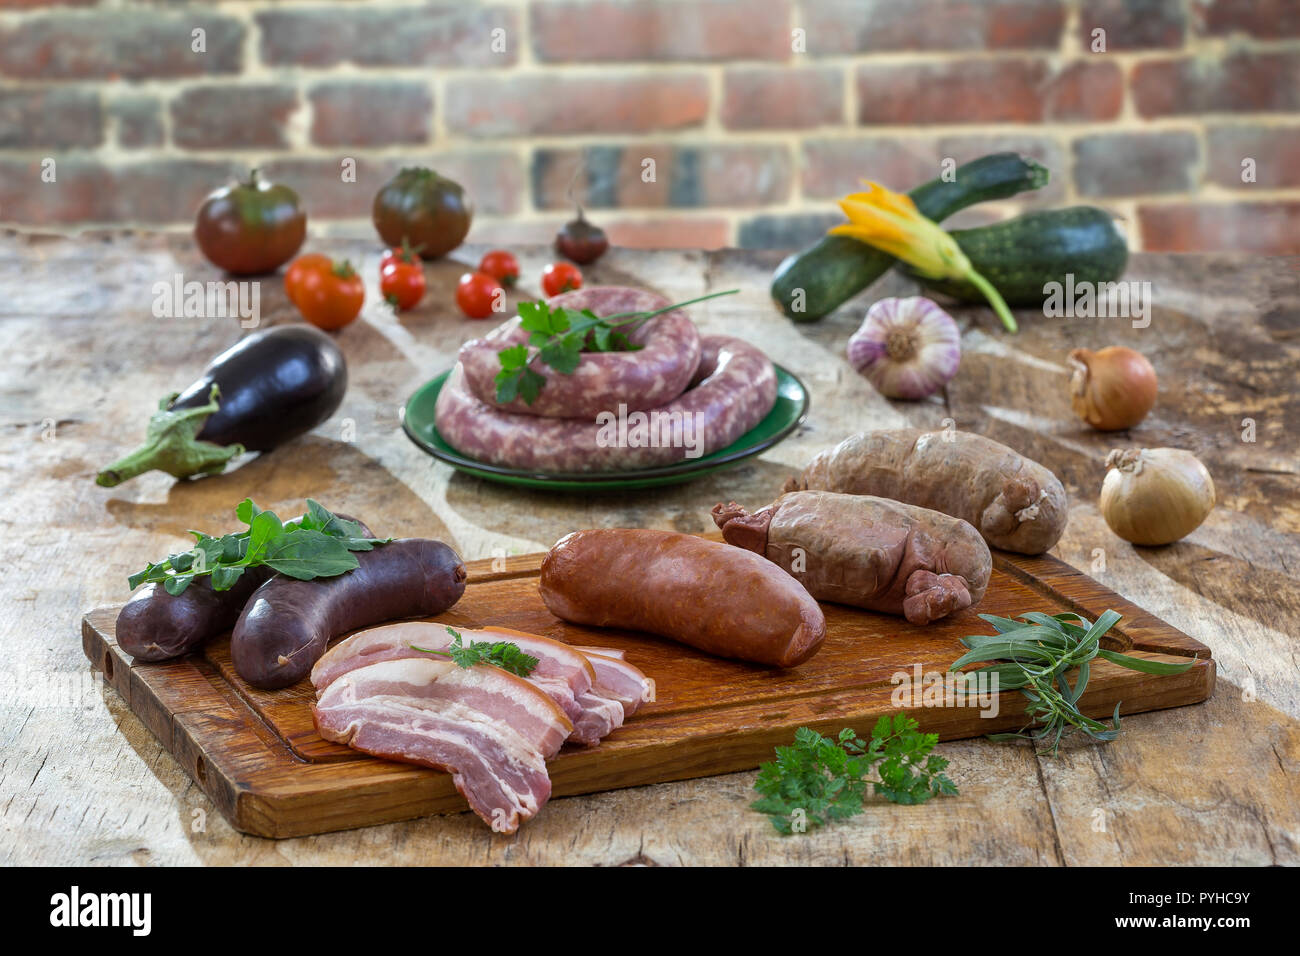 Selection of French Raw sausage with arugula leaves in a wooden board,vegetable on the table on old red brick background. Stock Photo